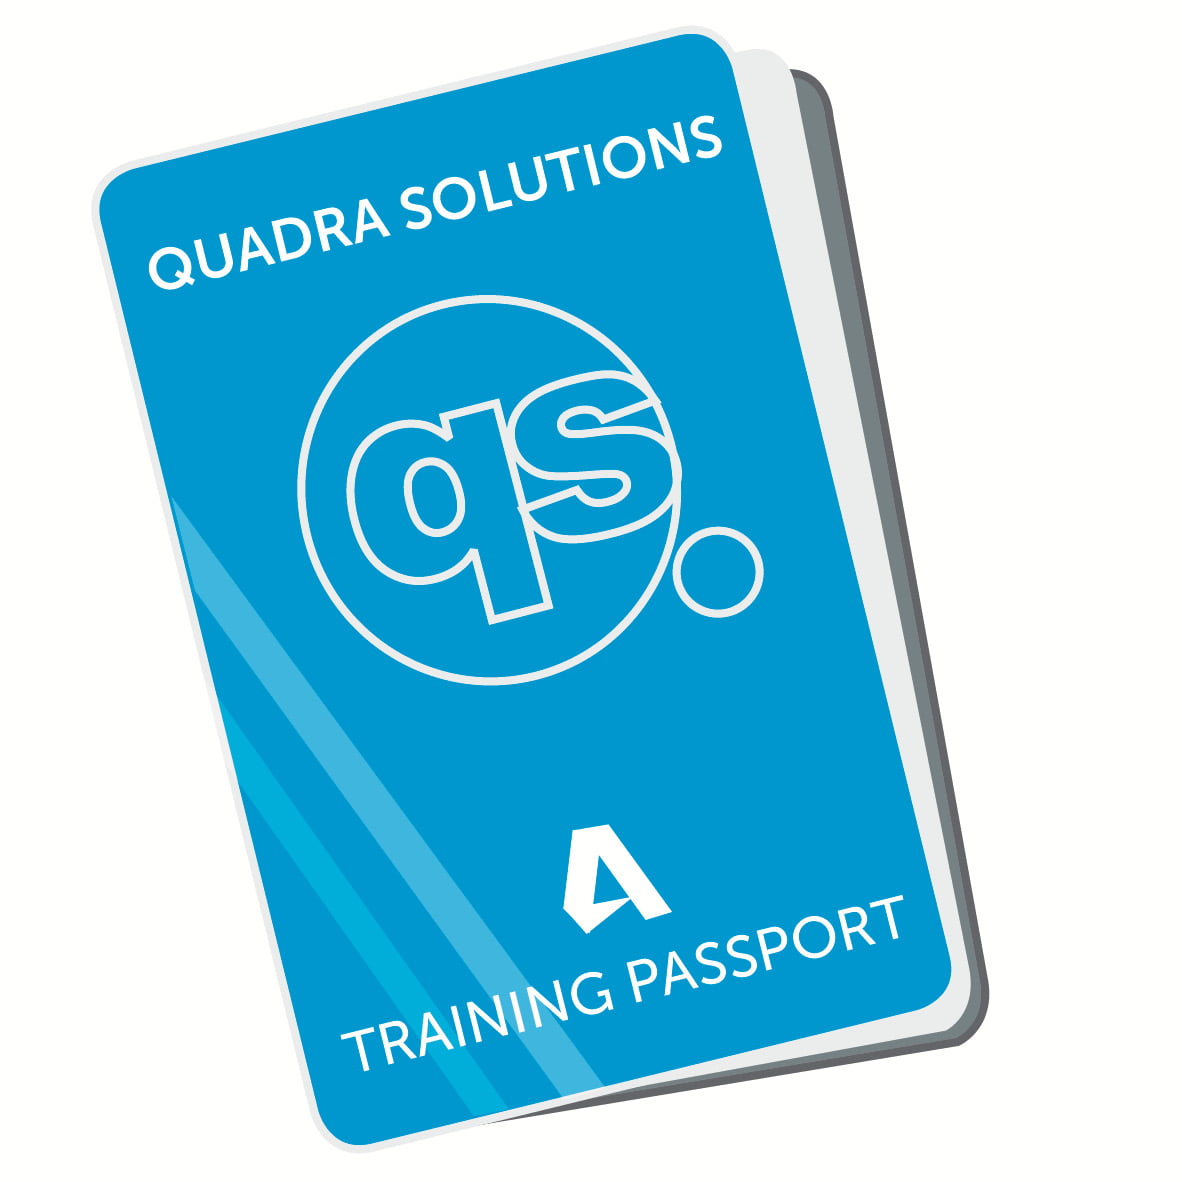 5 Reasons why our Autodesk Training Passport is a great investment